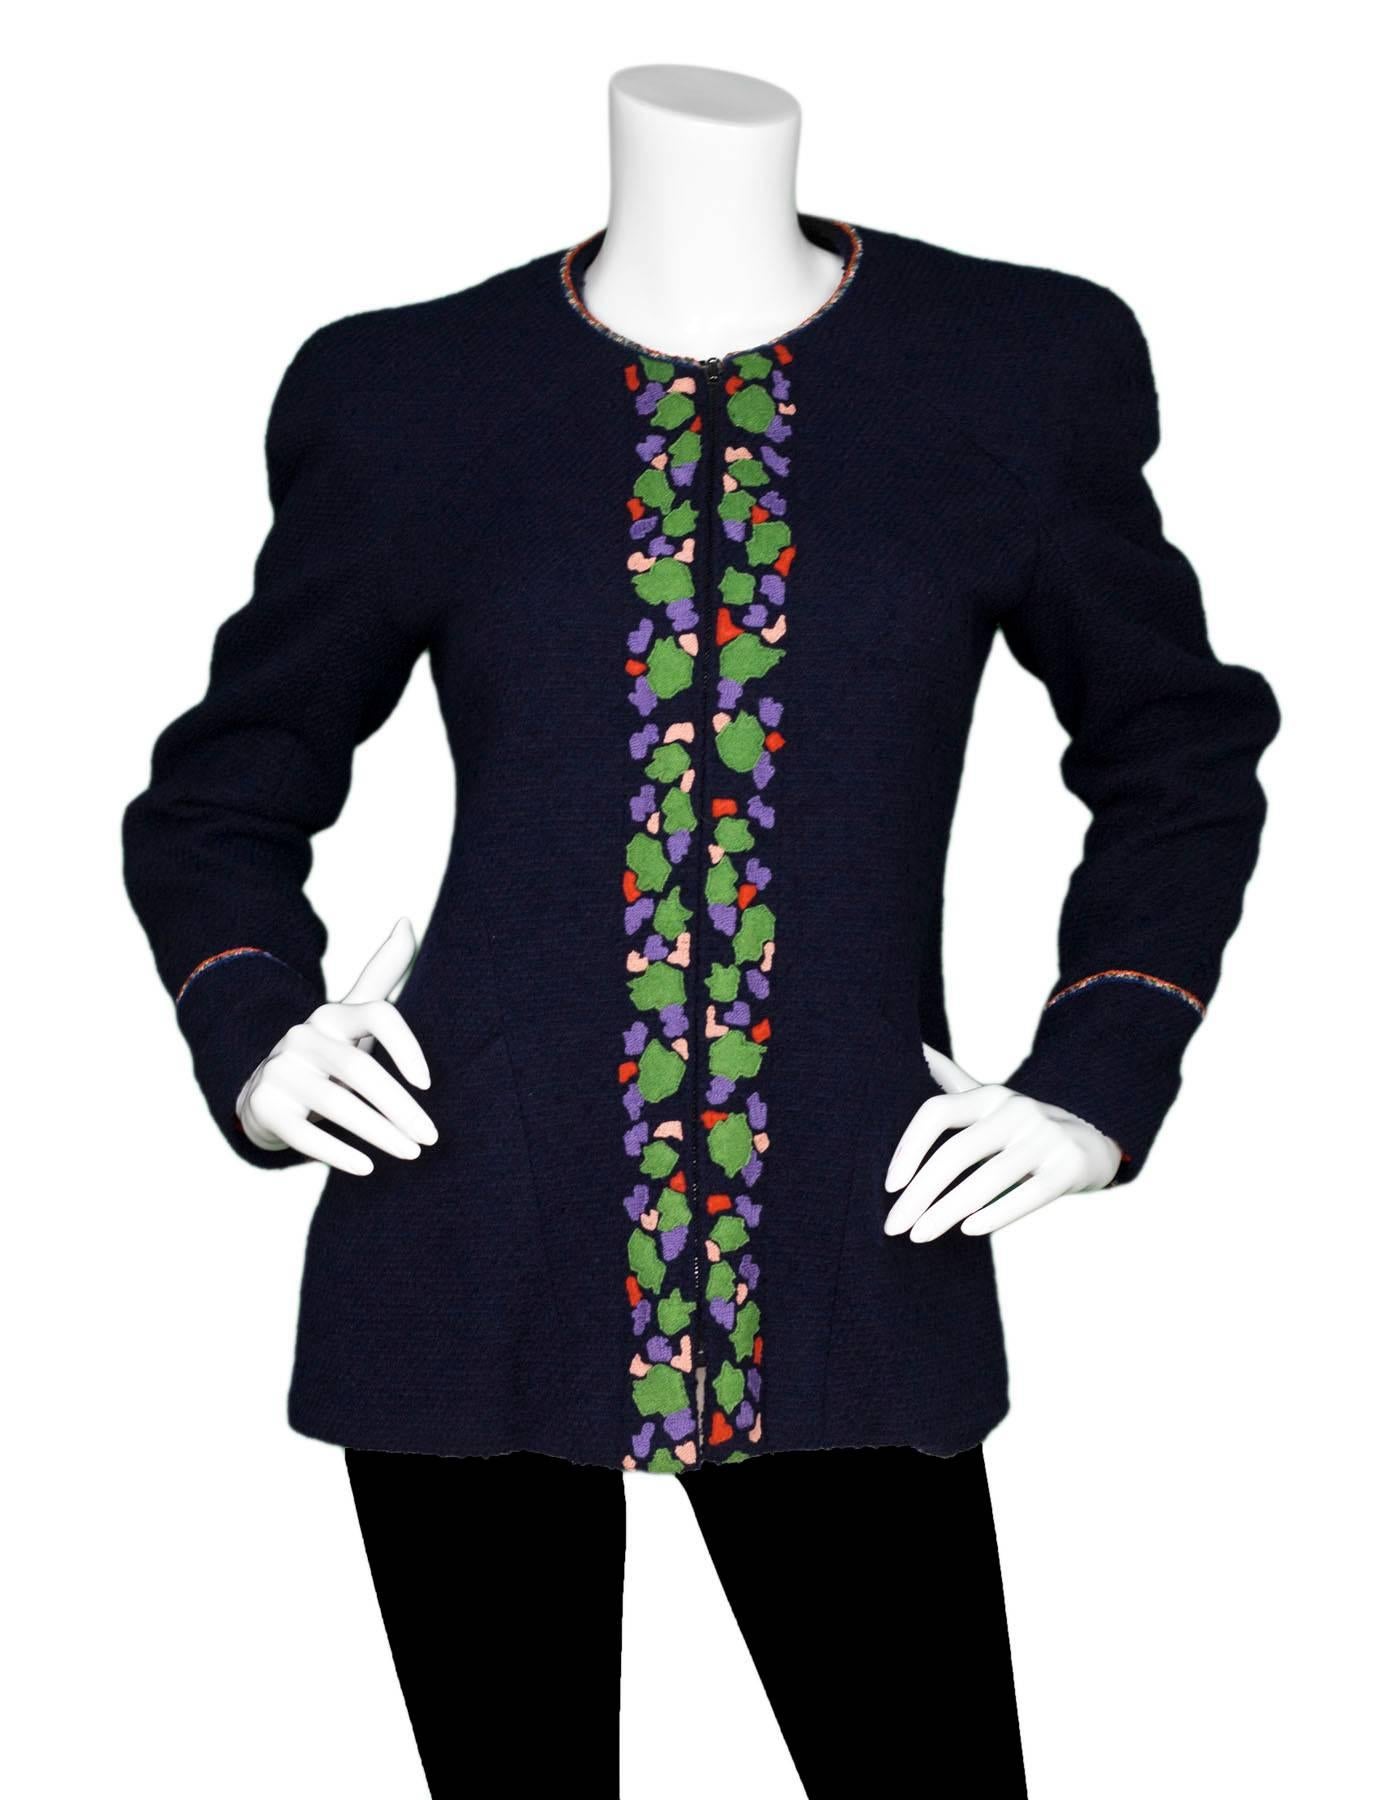 Chanel Navy Wool Boucle Jacket Sz FR40
Features green, purple and orange abstract trim and shoulder padding

Made In: France
Year of Production: 1997
Color: Navy, green, purple and orange
Composition: 88% Wool, 12% Nylon
Lining: Orange / 95% silk,